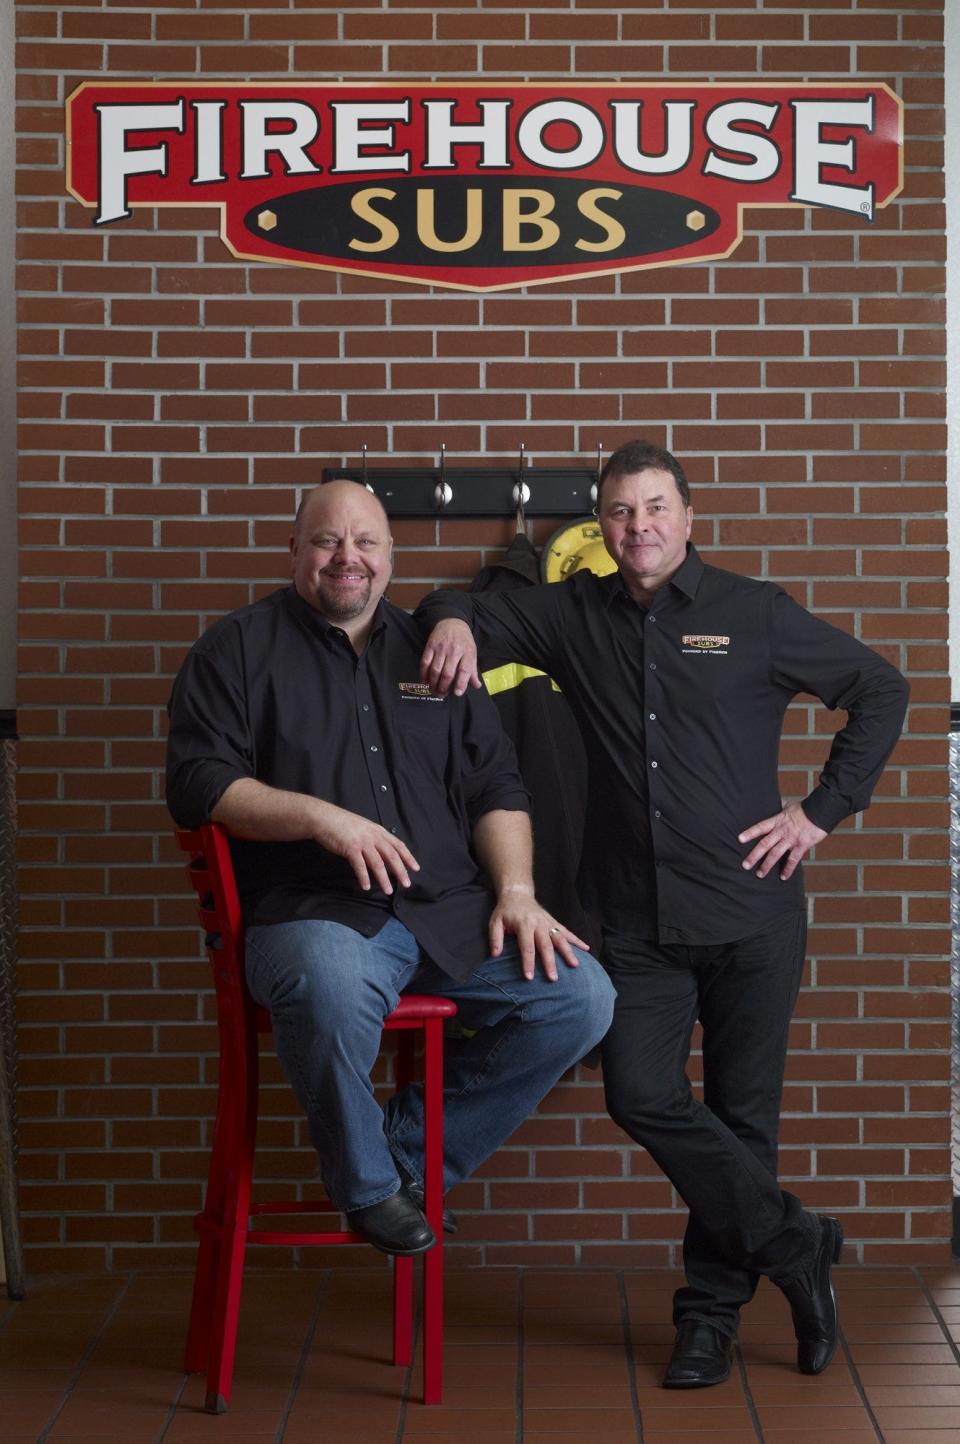 Brothers Robin (left) and Chris Sorensen, former Jacksonville firefighters, founded Firehouse Subs in Jacksonville in 1994.